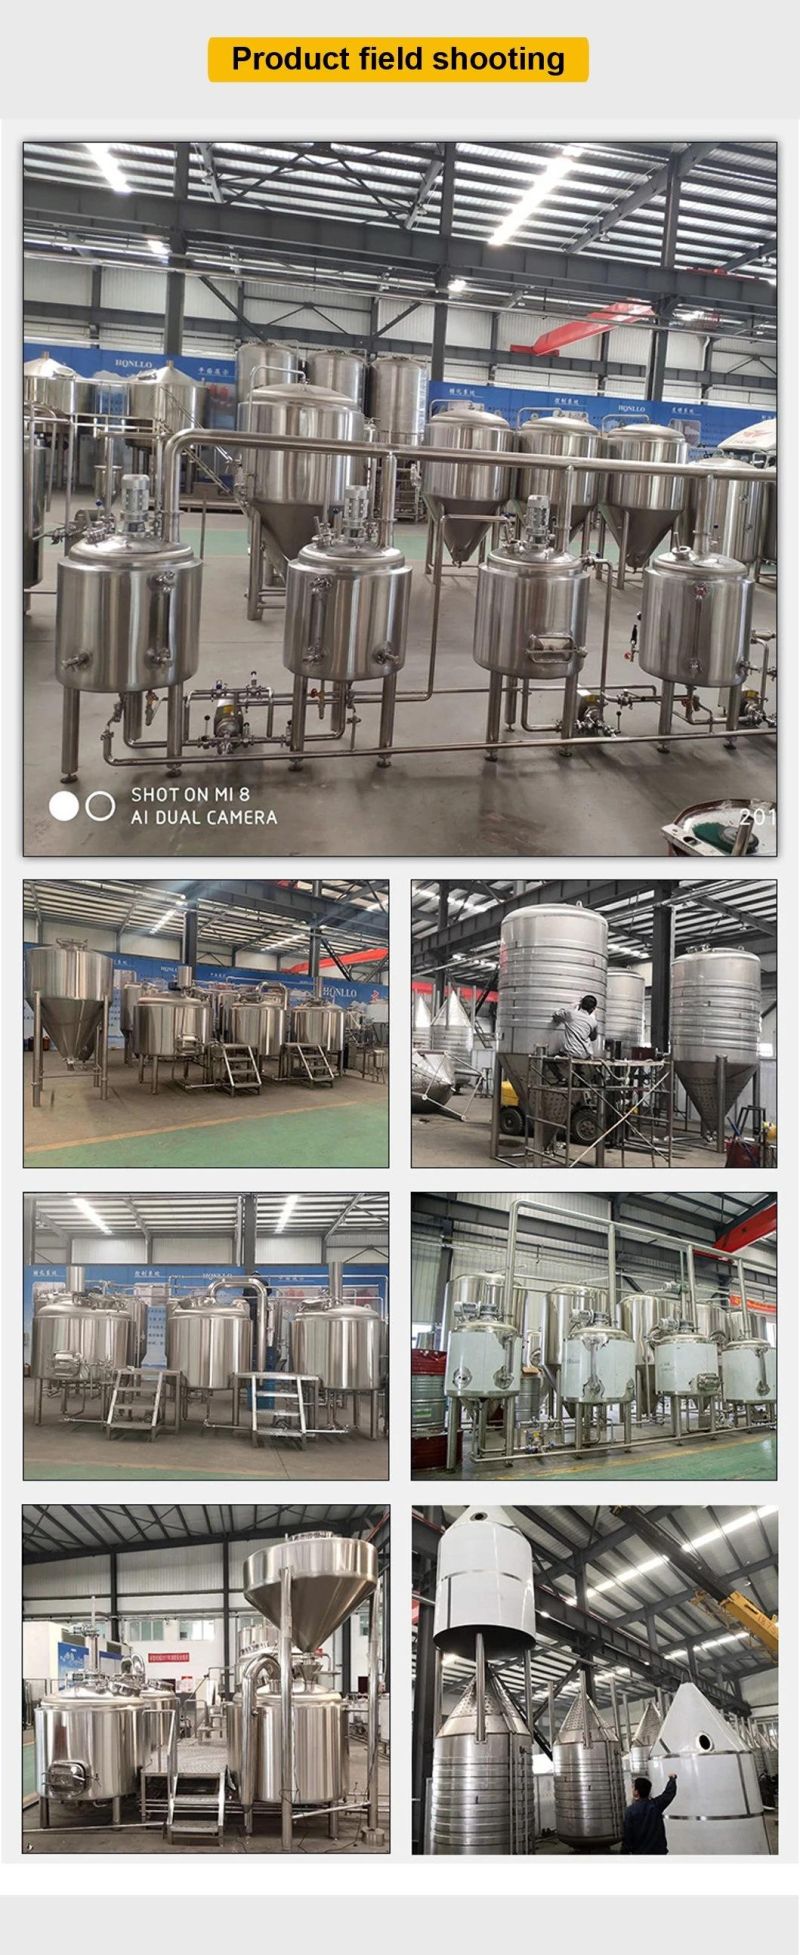 Discount Offer Low Price Customized Brew Equipment Price